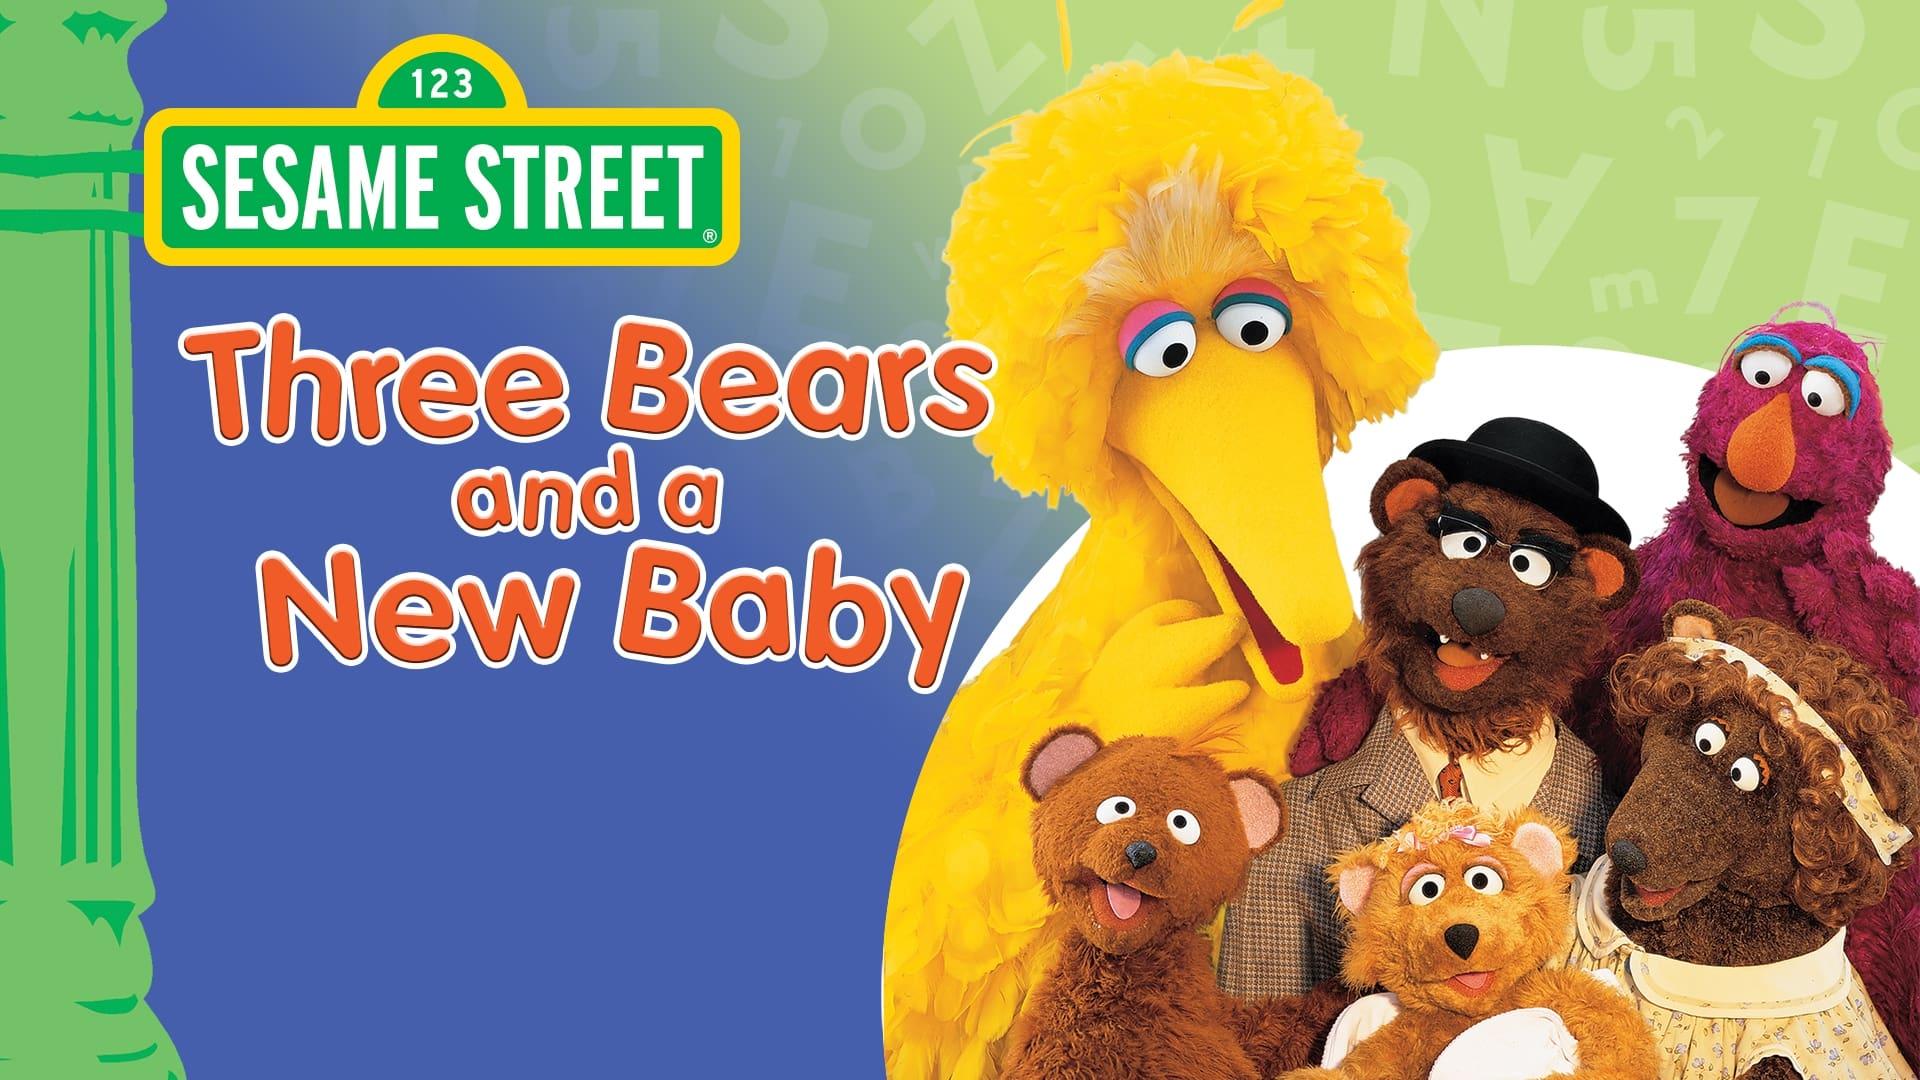 Sesame Street: Three Bears and a New Baby backdrop